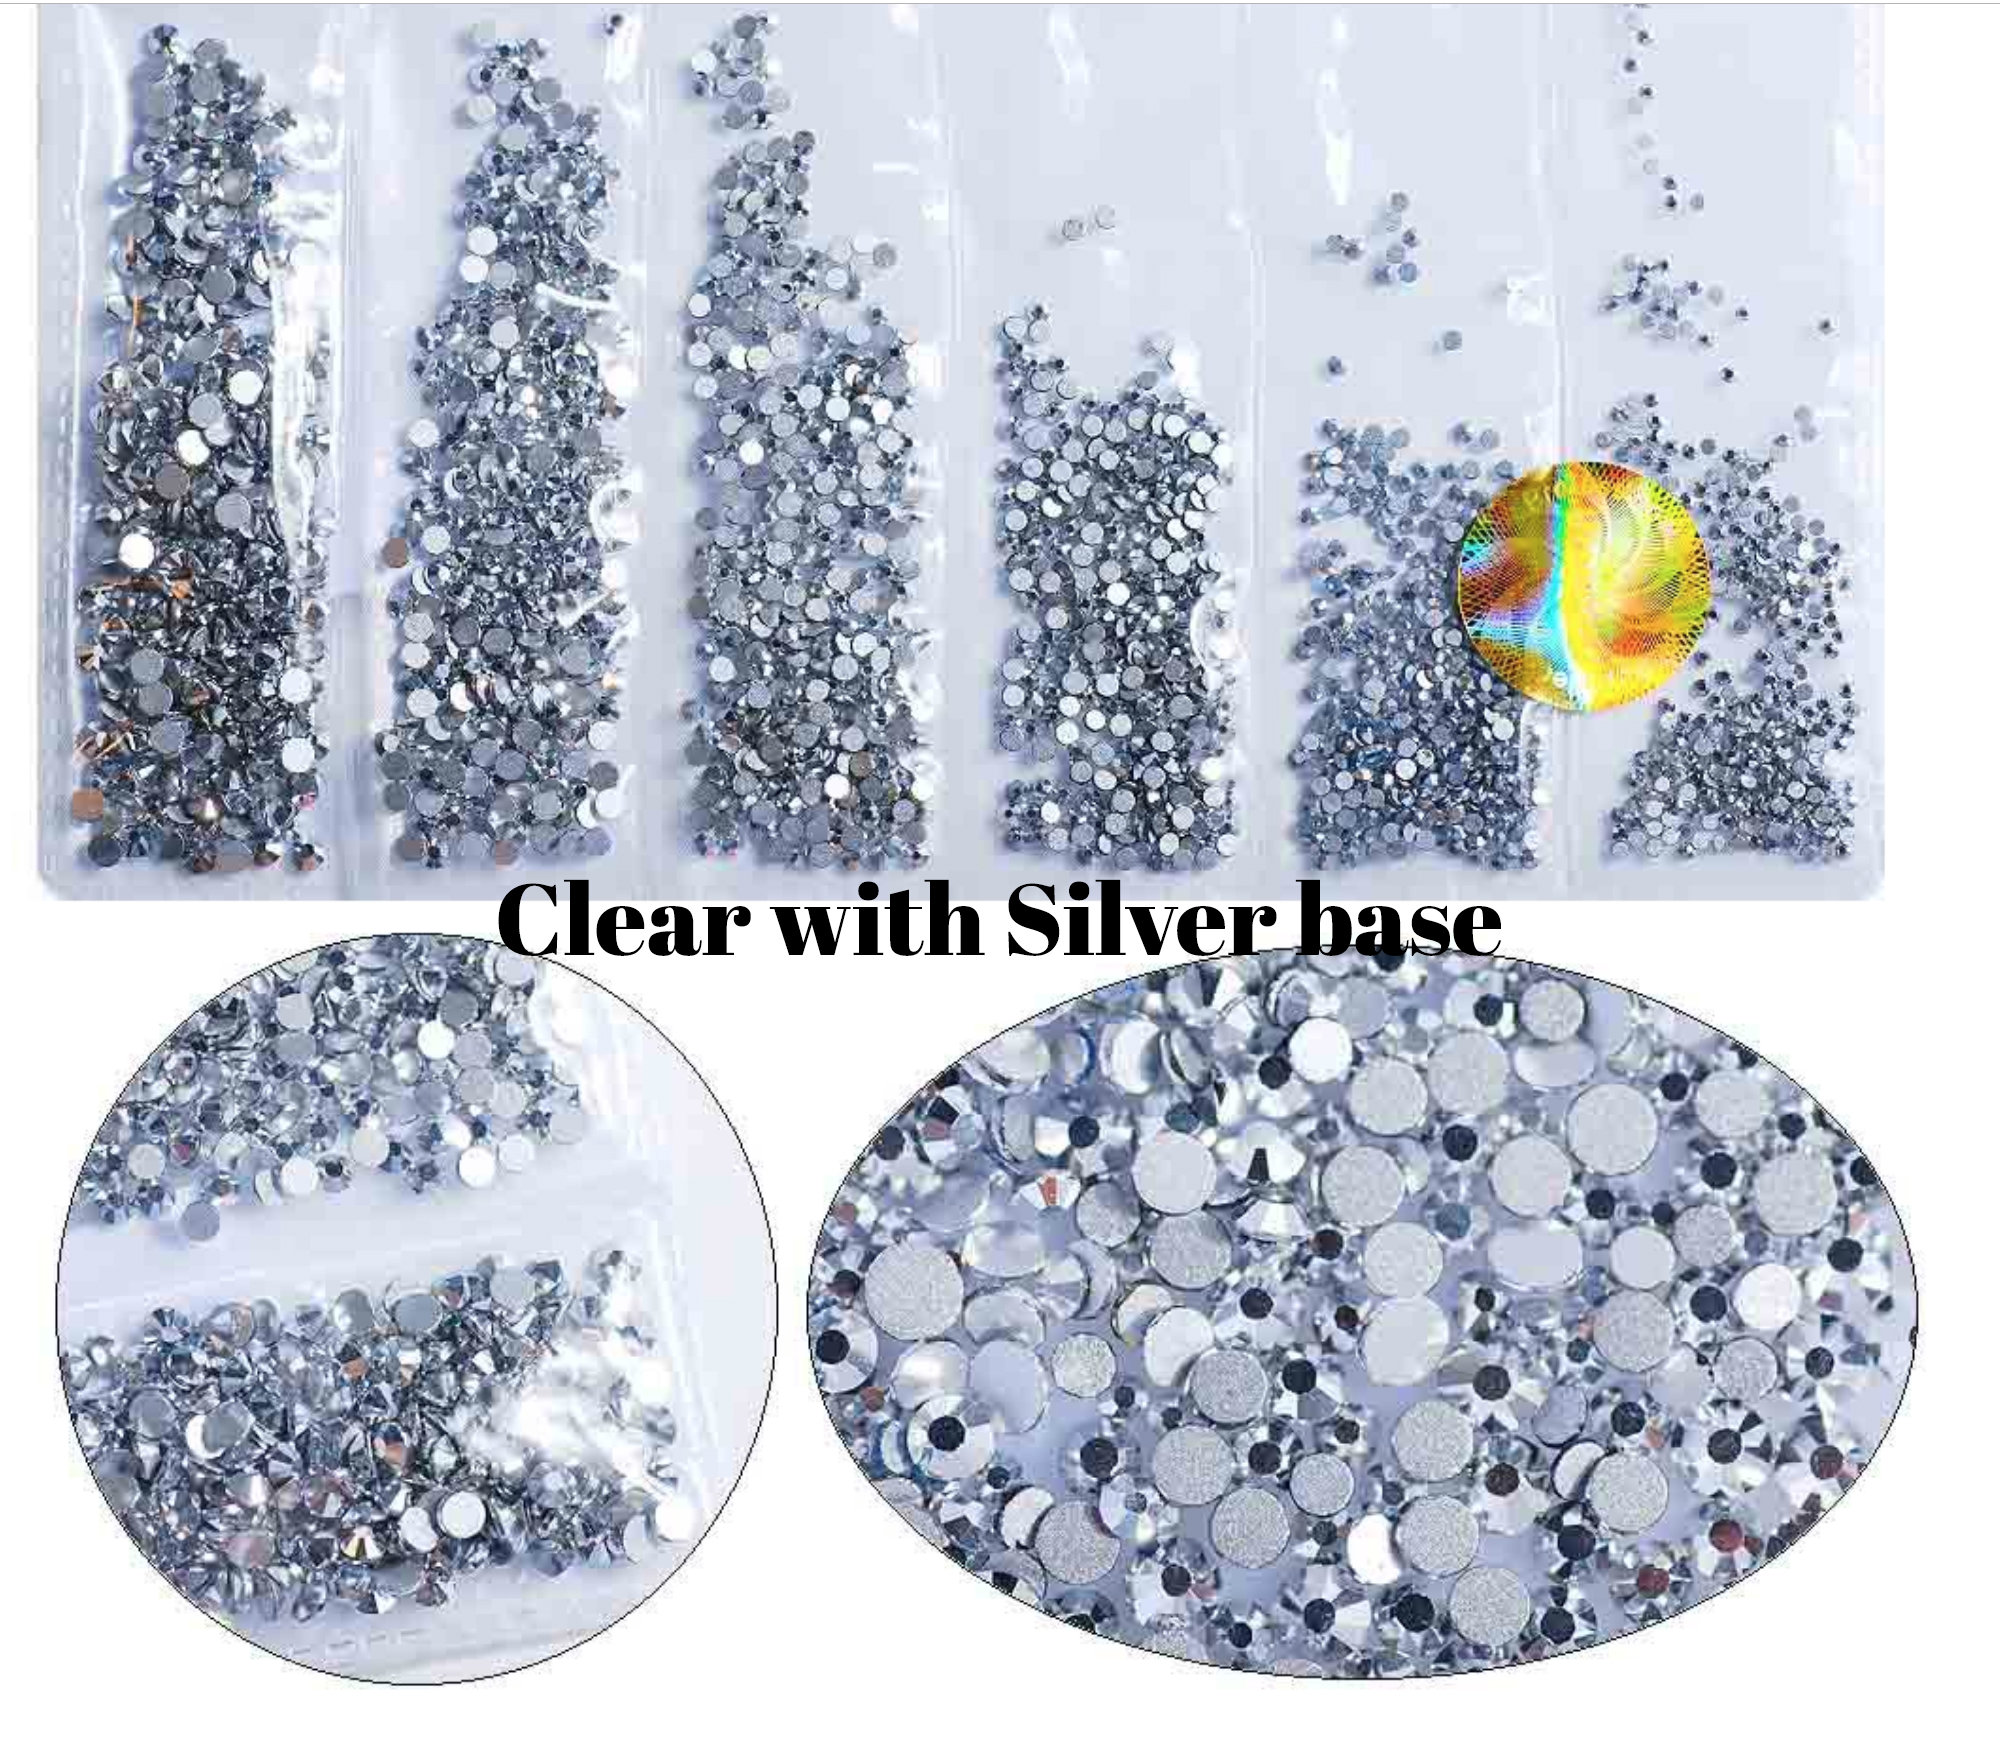 180+1728 Pcs Nail Rhinestones, AB Crystal Rhinestones for Nails, Flatback  Crystals with Mixed Shapes and Sizes for Nail Art, Clothes, Jewelry AB 180